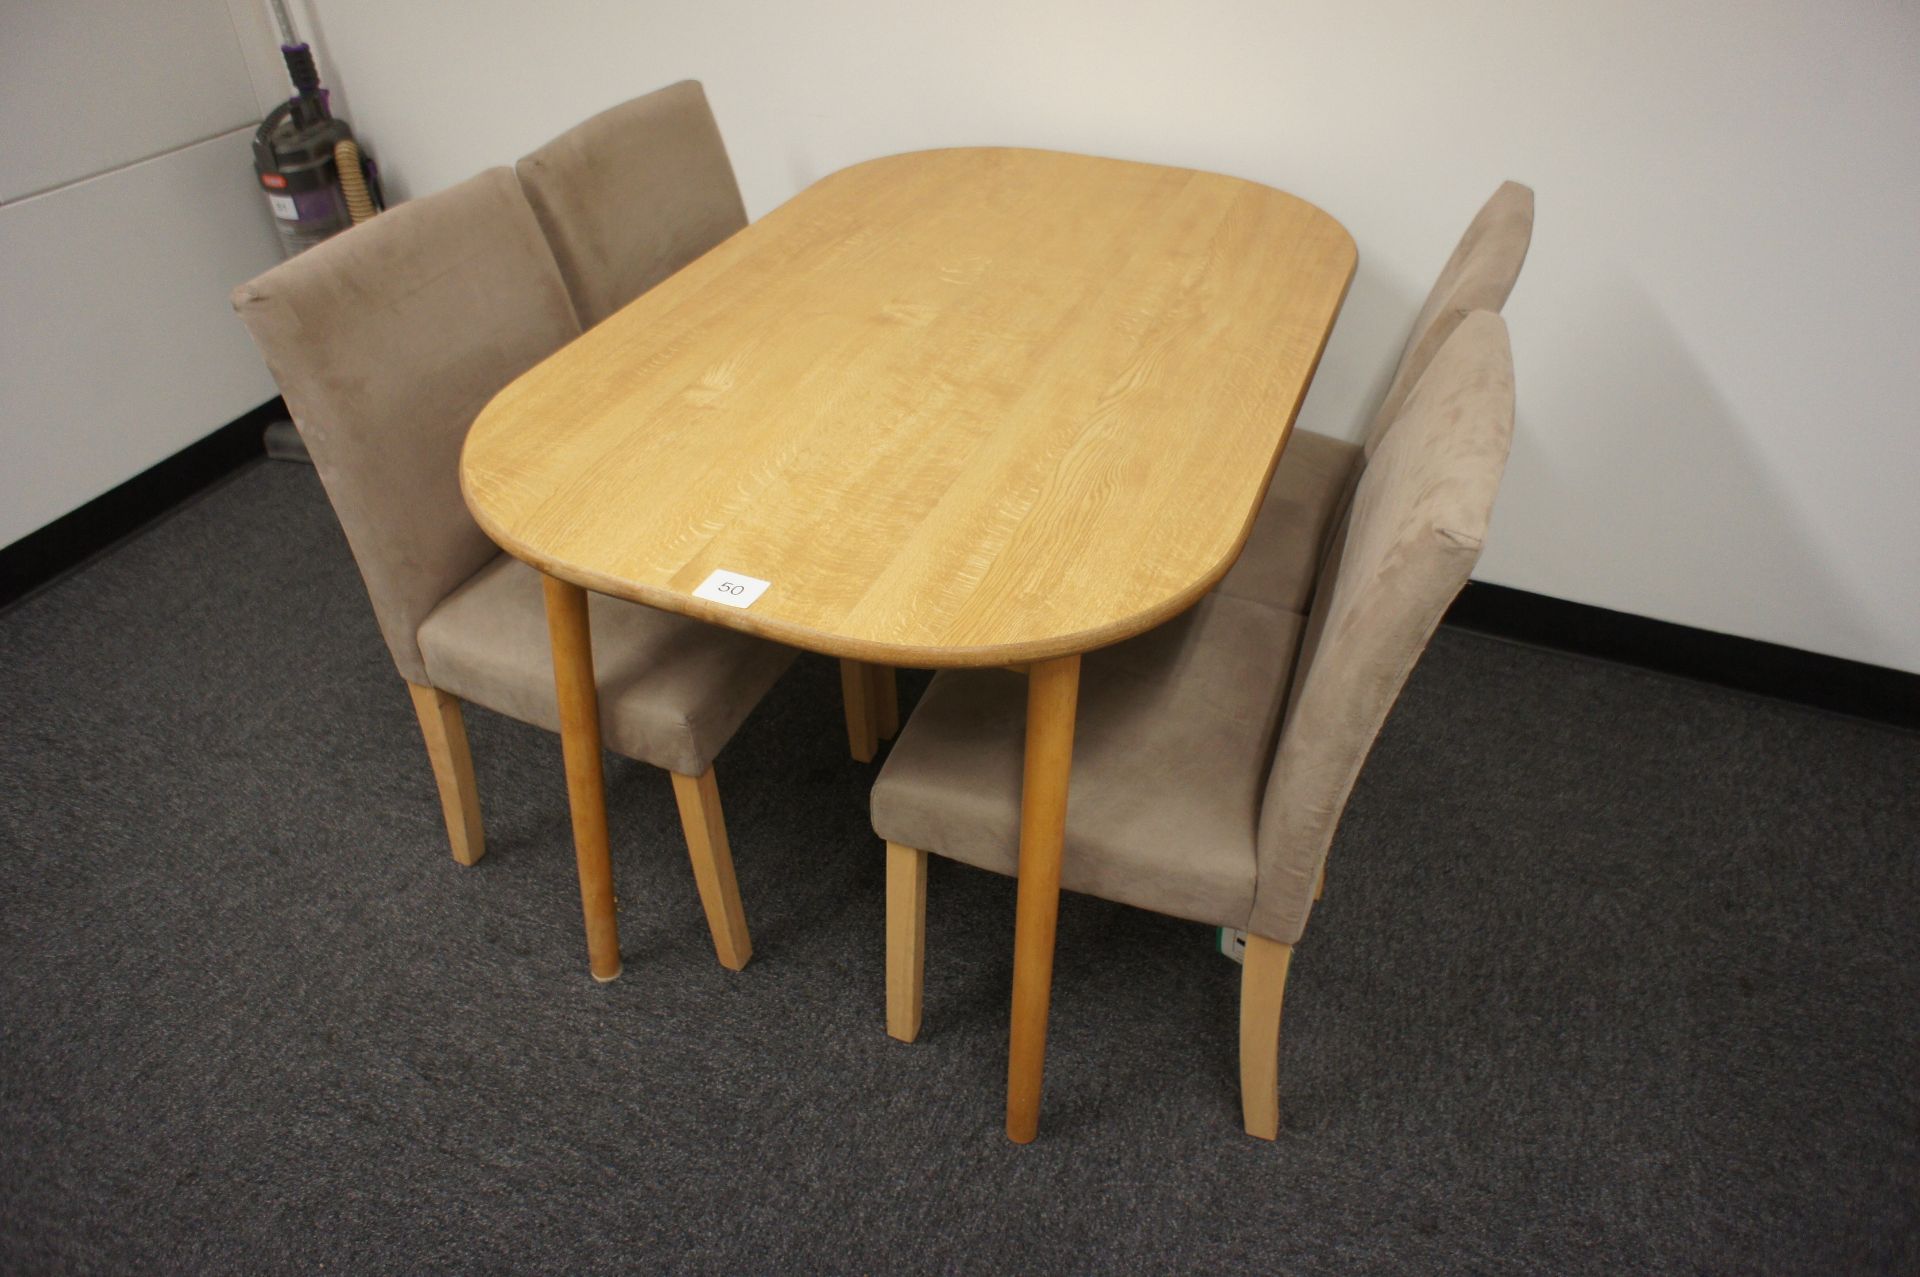 Oak Effect Dinning Table with 4 Upholstered Chairs - Image 2 of 3